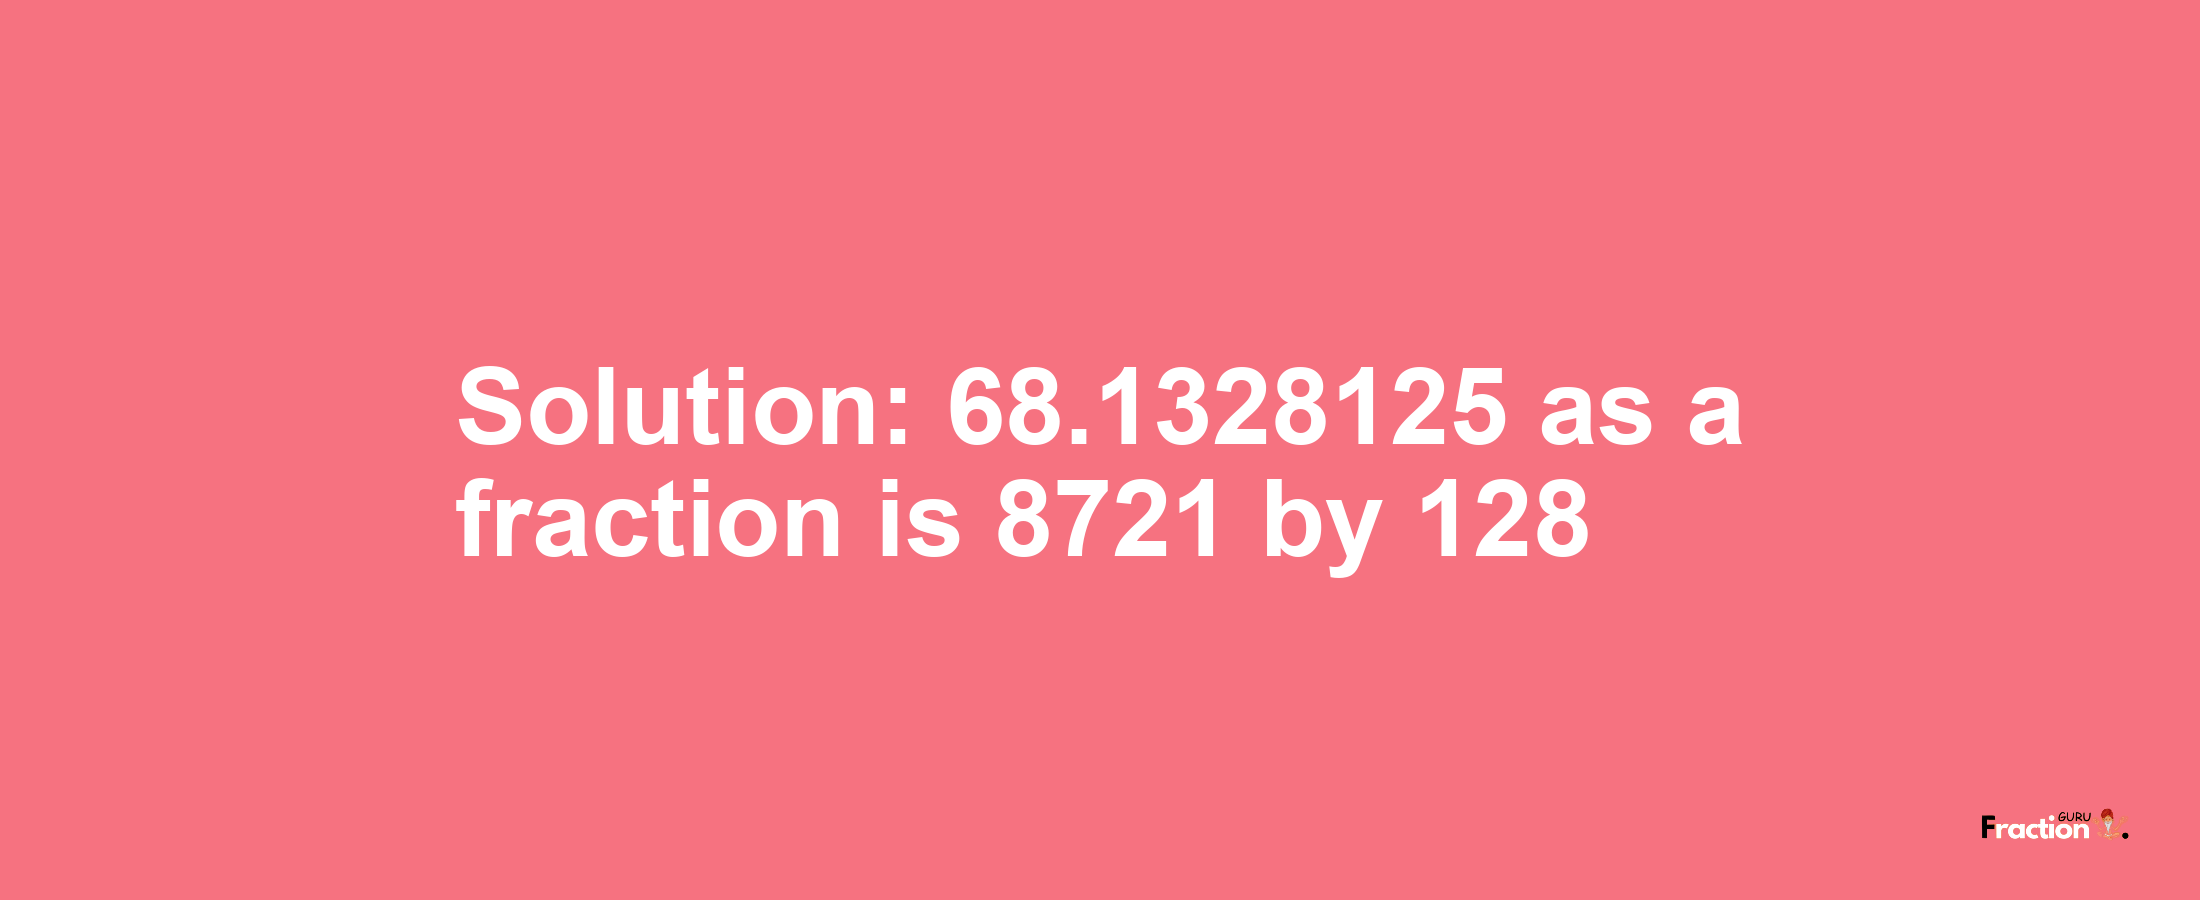 Solution:68.1328125 as a fraction is 8721/128